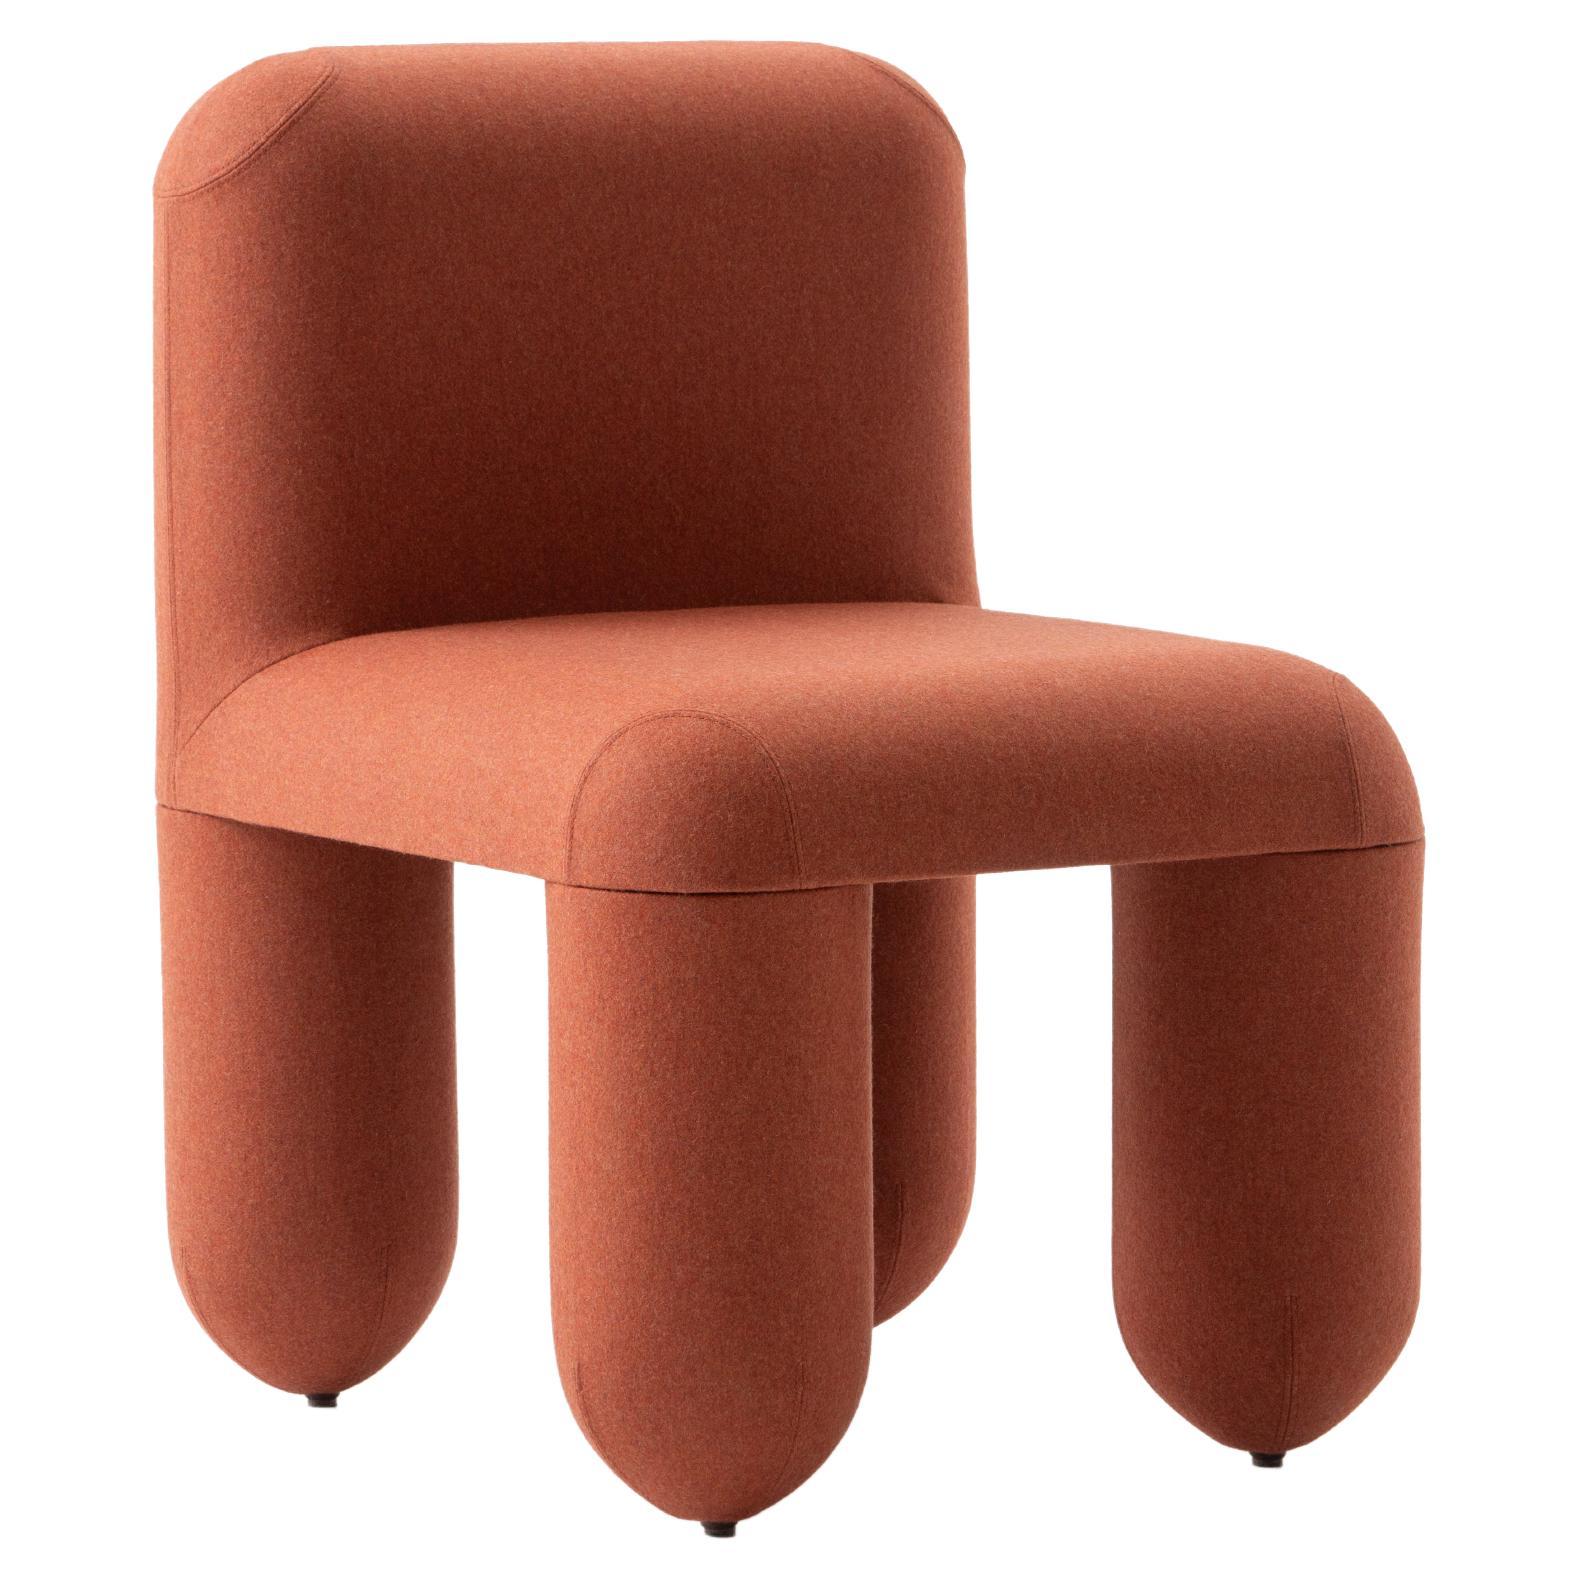 Contemporary Dining Chair 'Hello' by Denys Sokolov x Noom, Orange